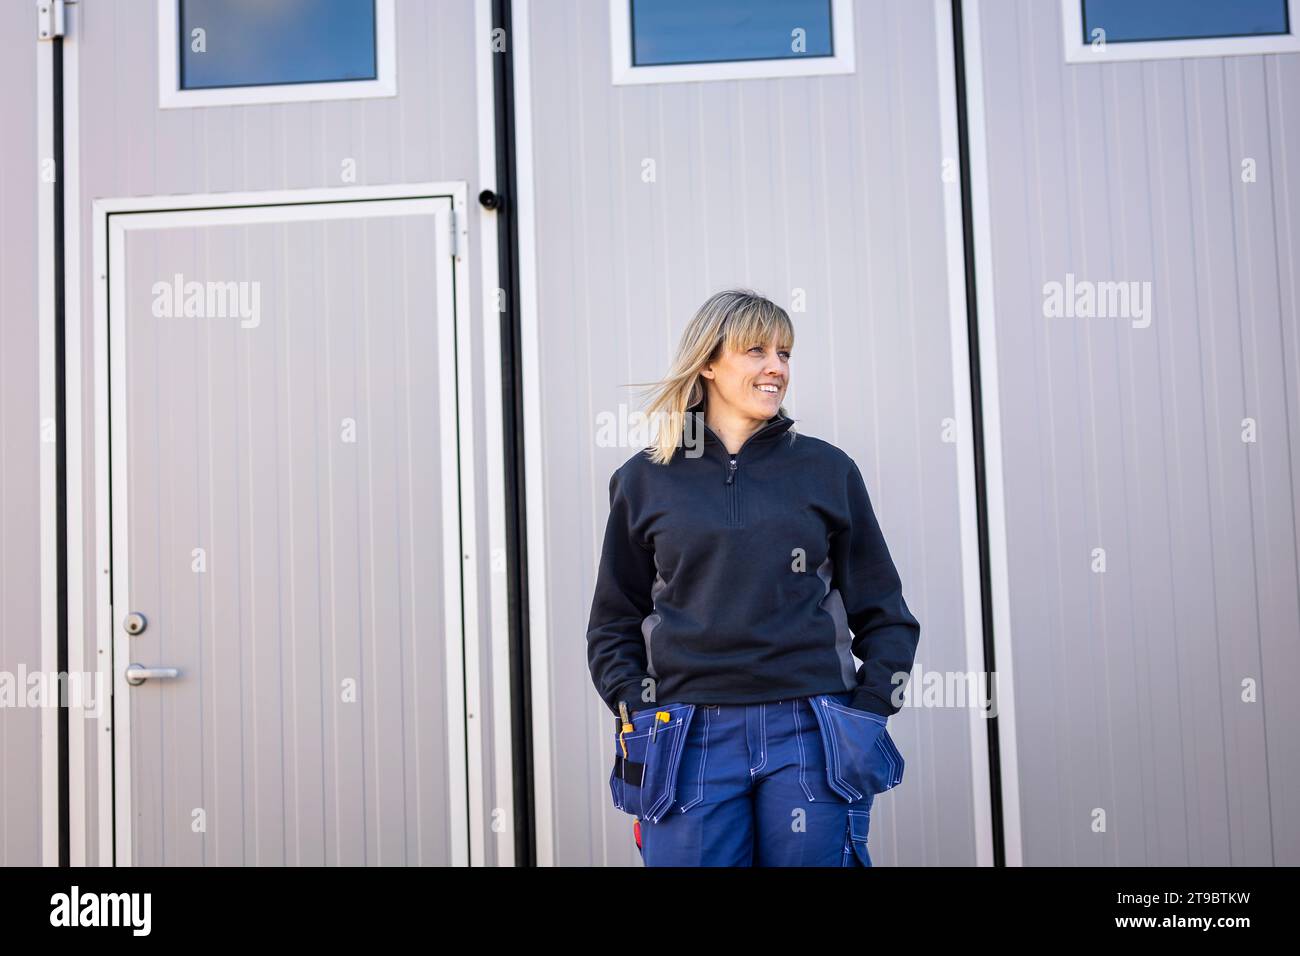 Female blue-collar worker with hands in pockets standing against door Stock Photo